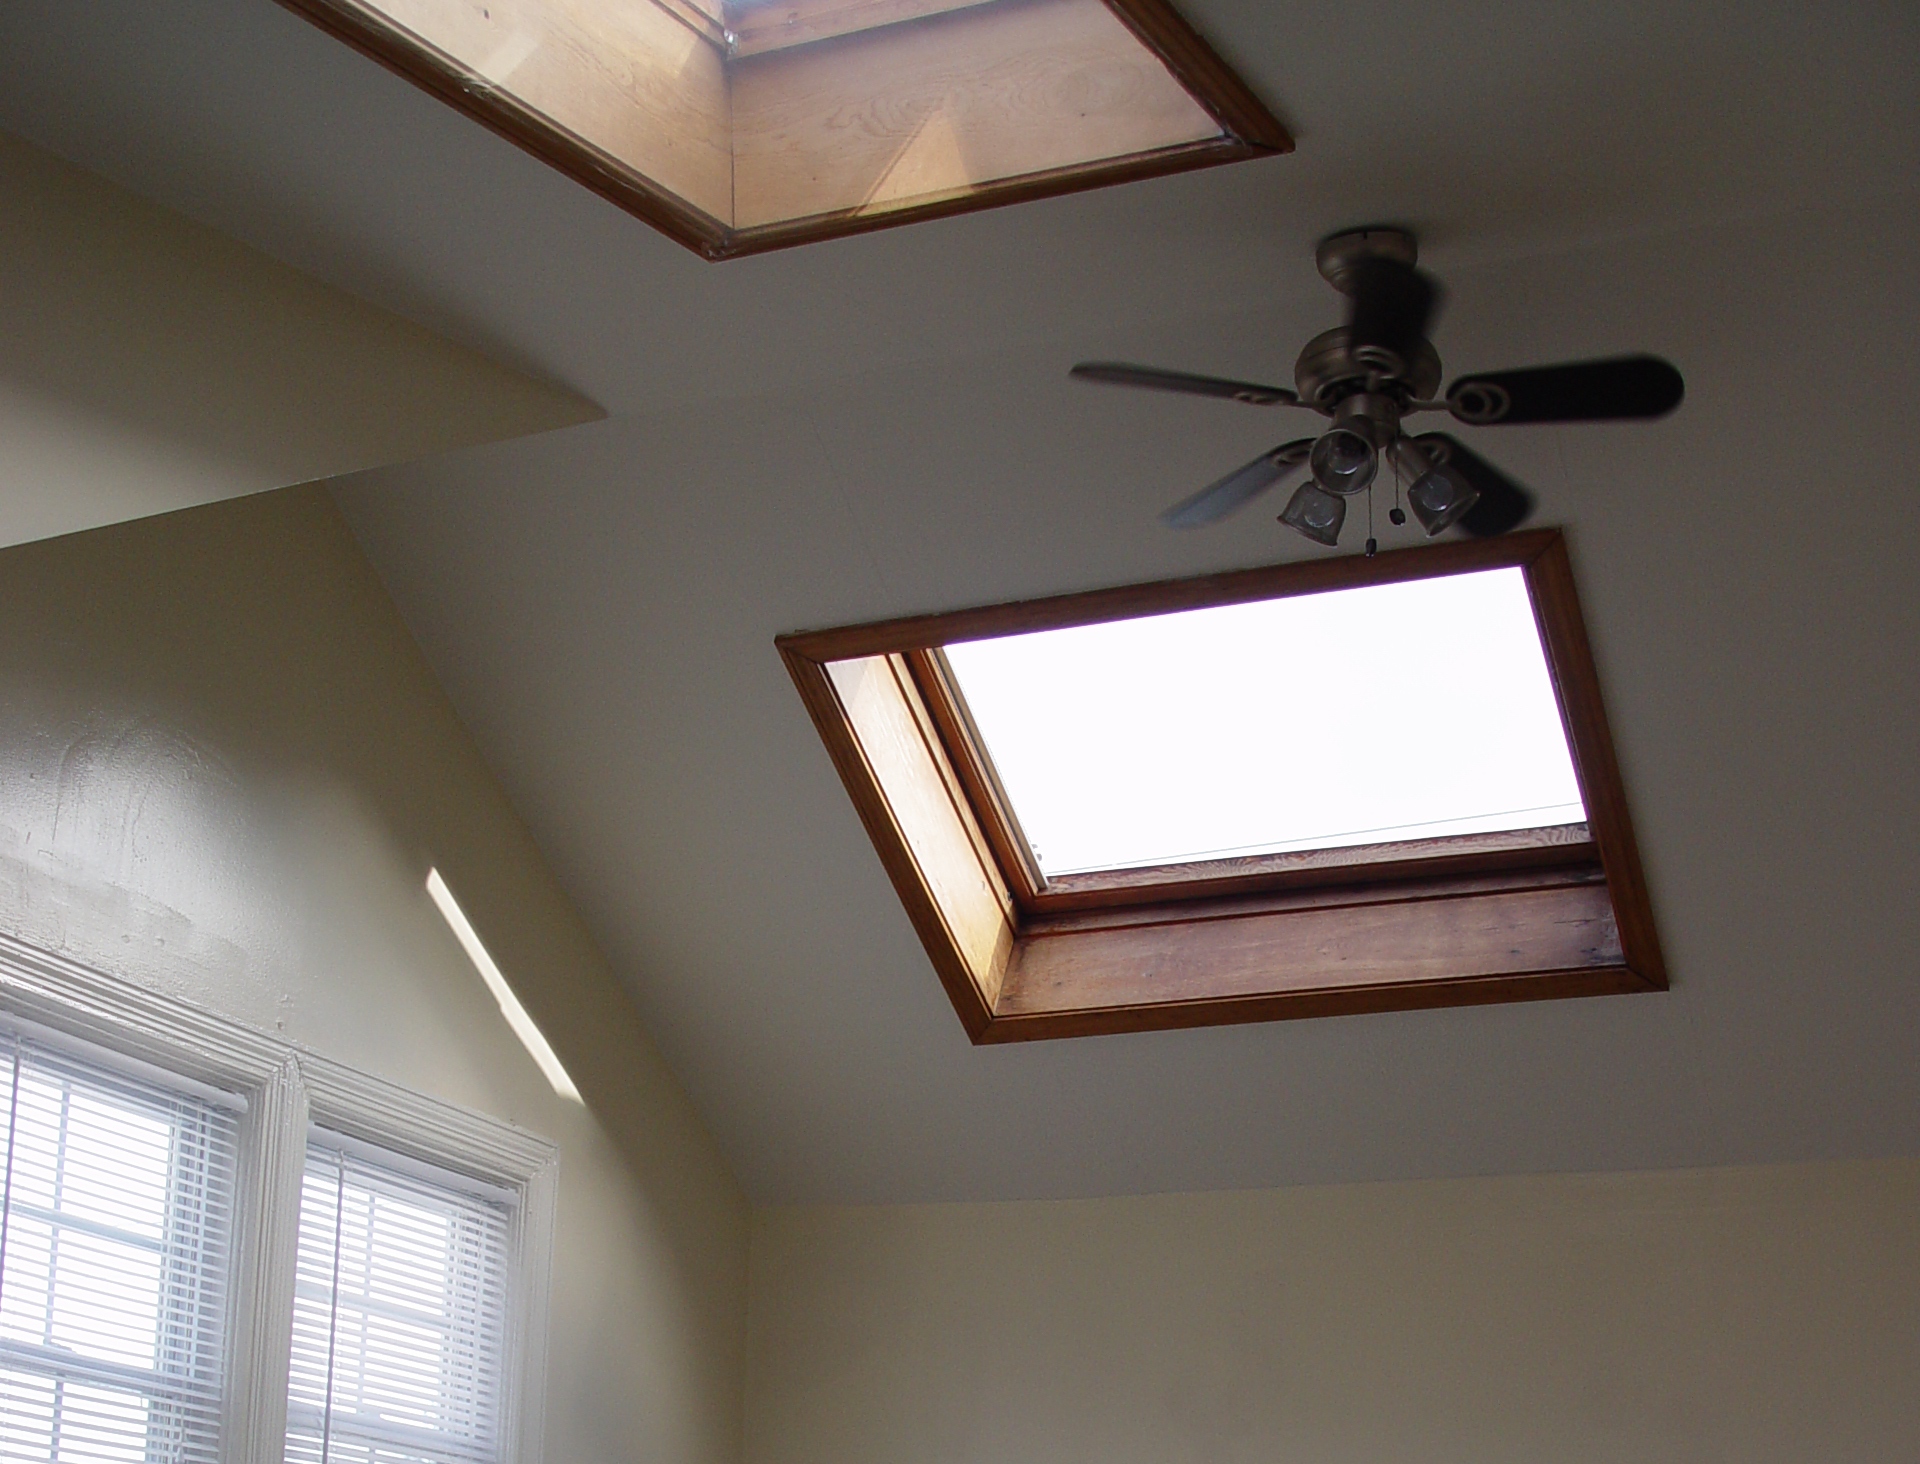 How do you install roof skylights?